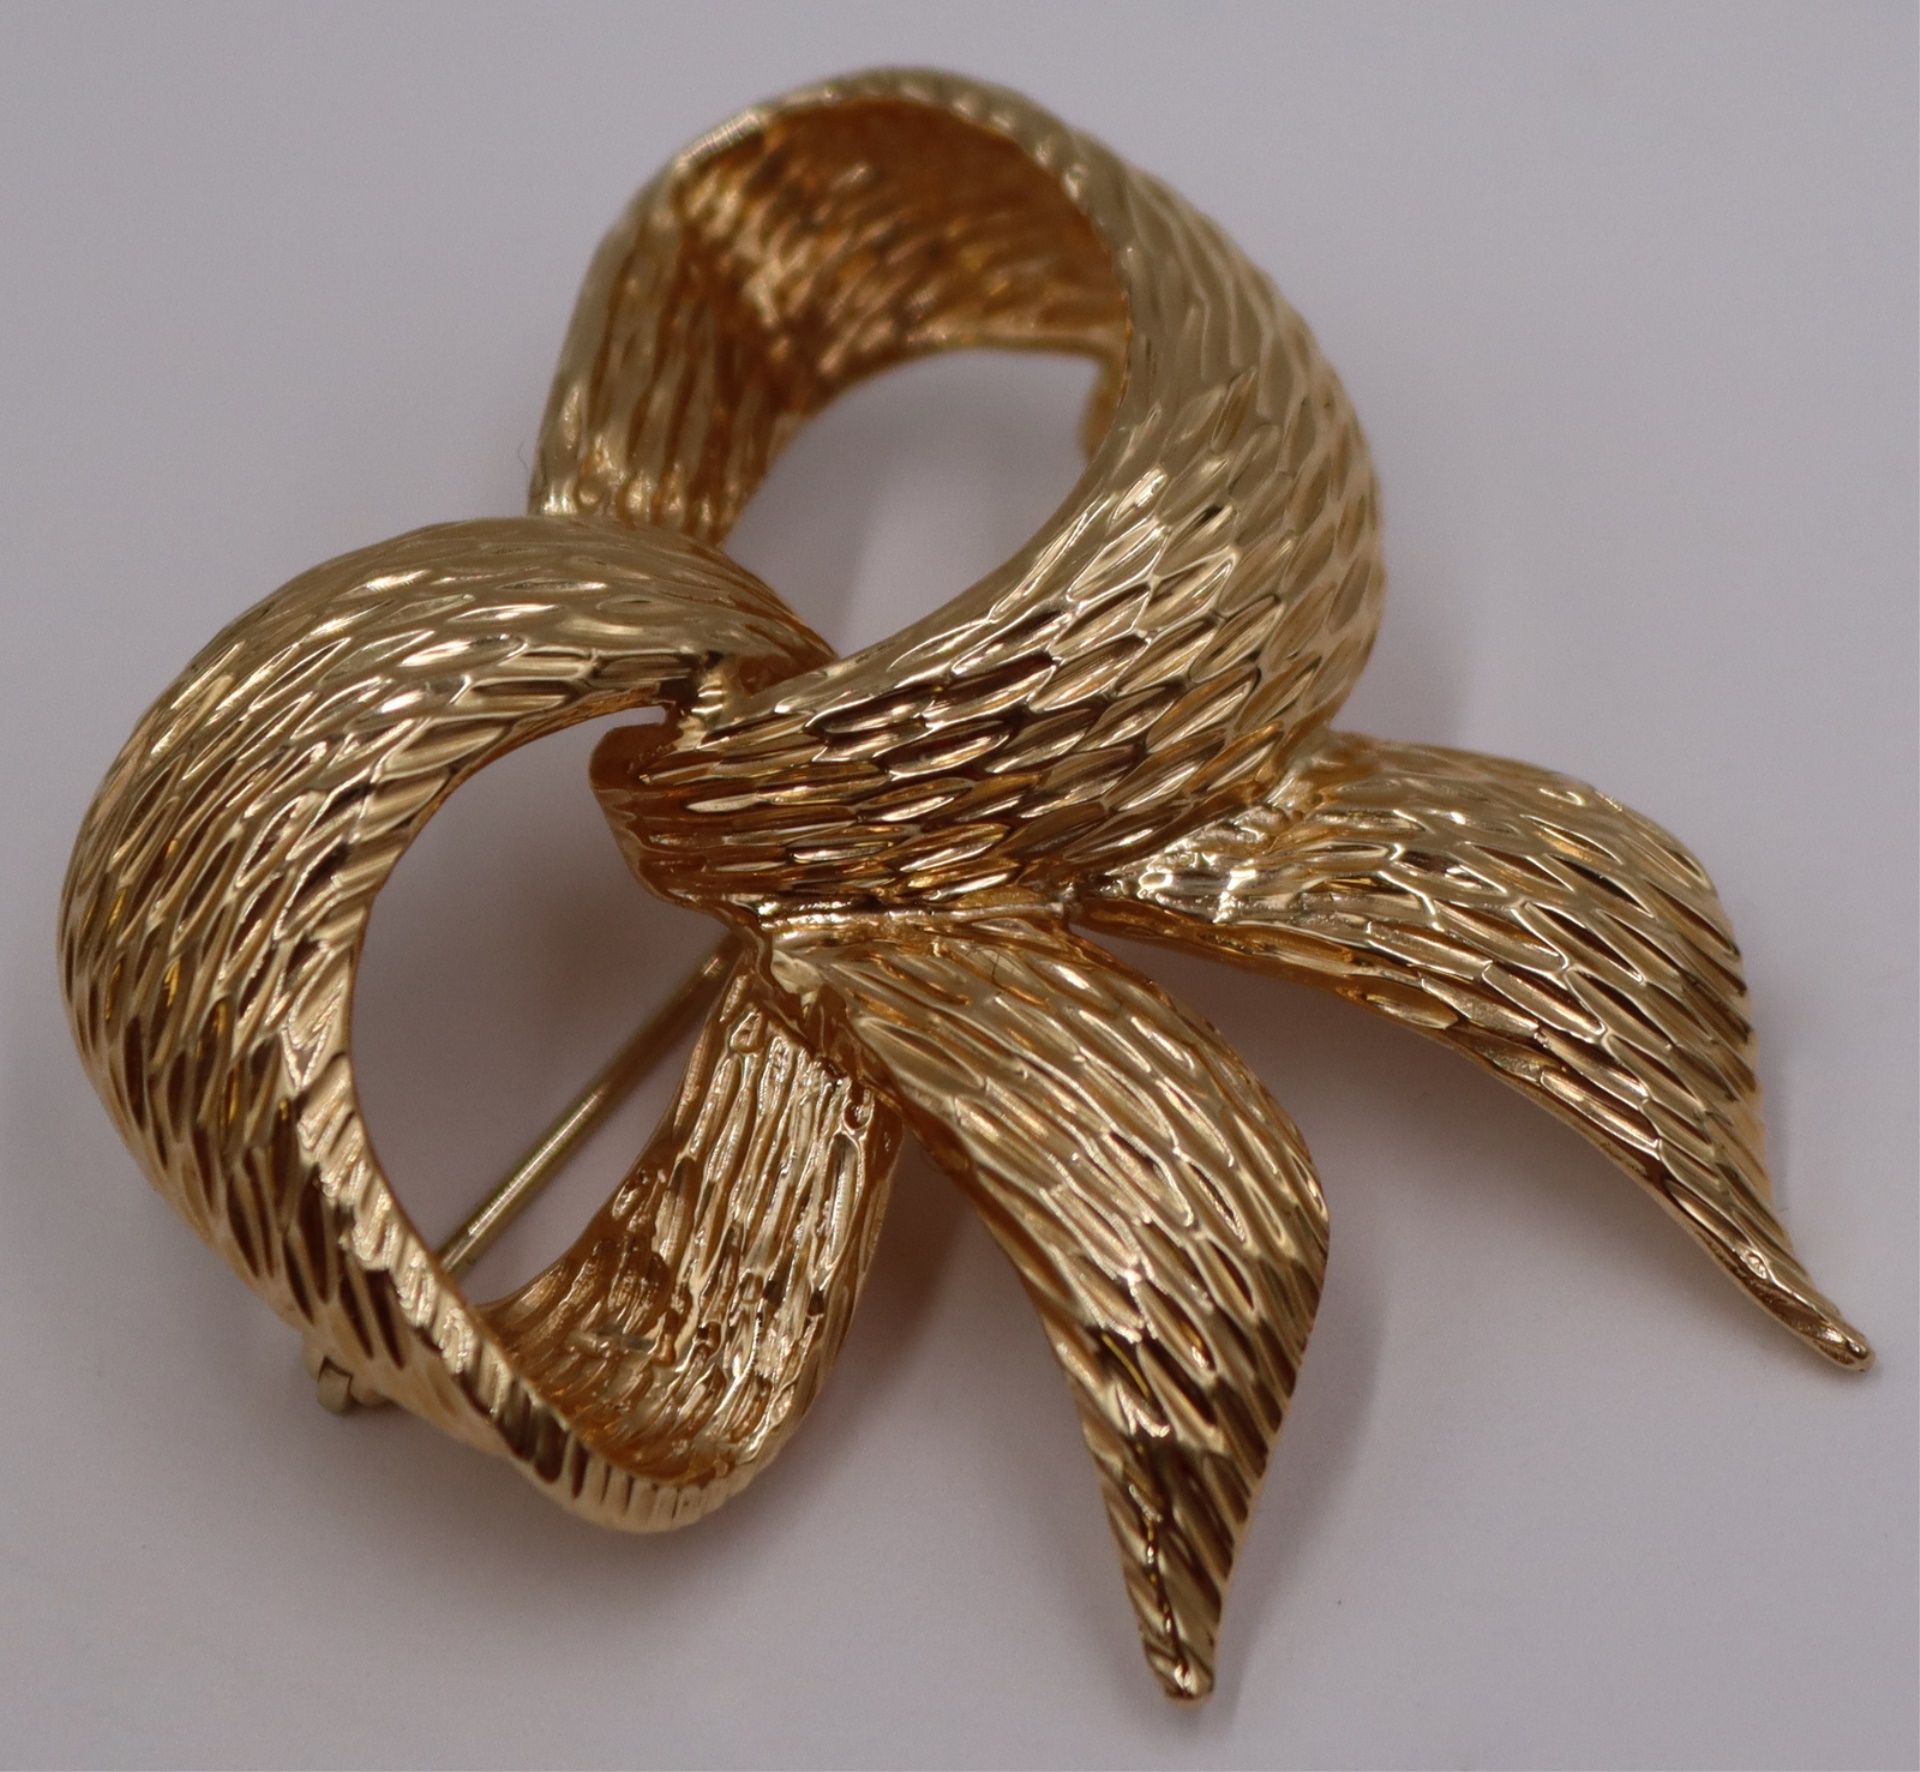 JEWELRY DANKNER 14KT GOLD BOW 3be603